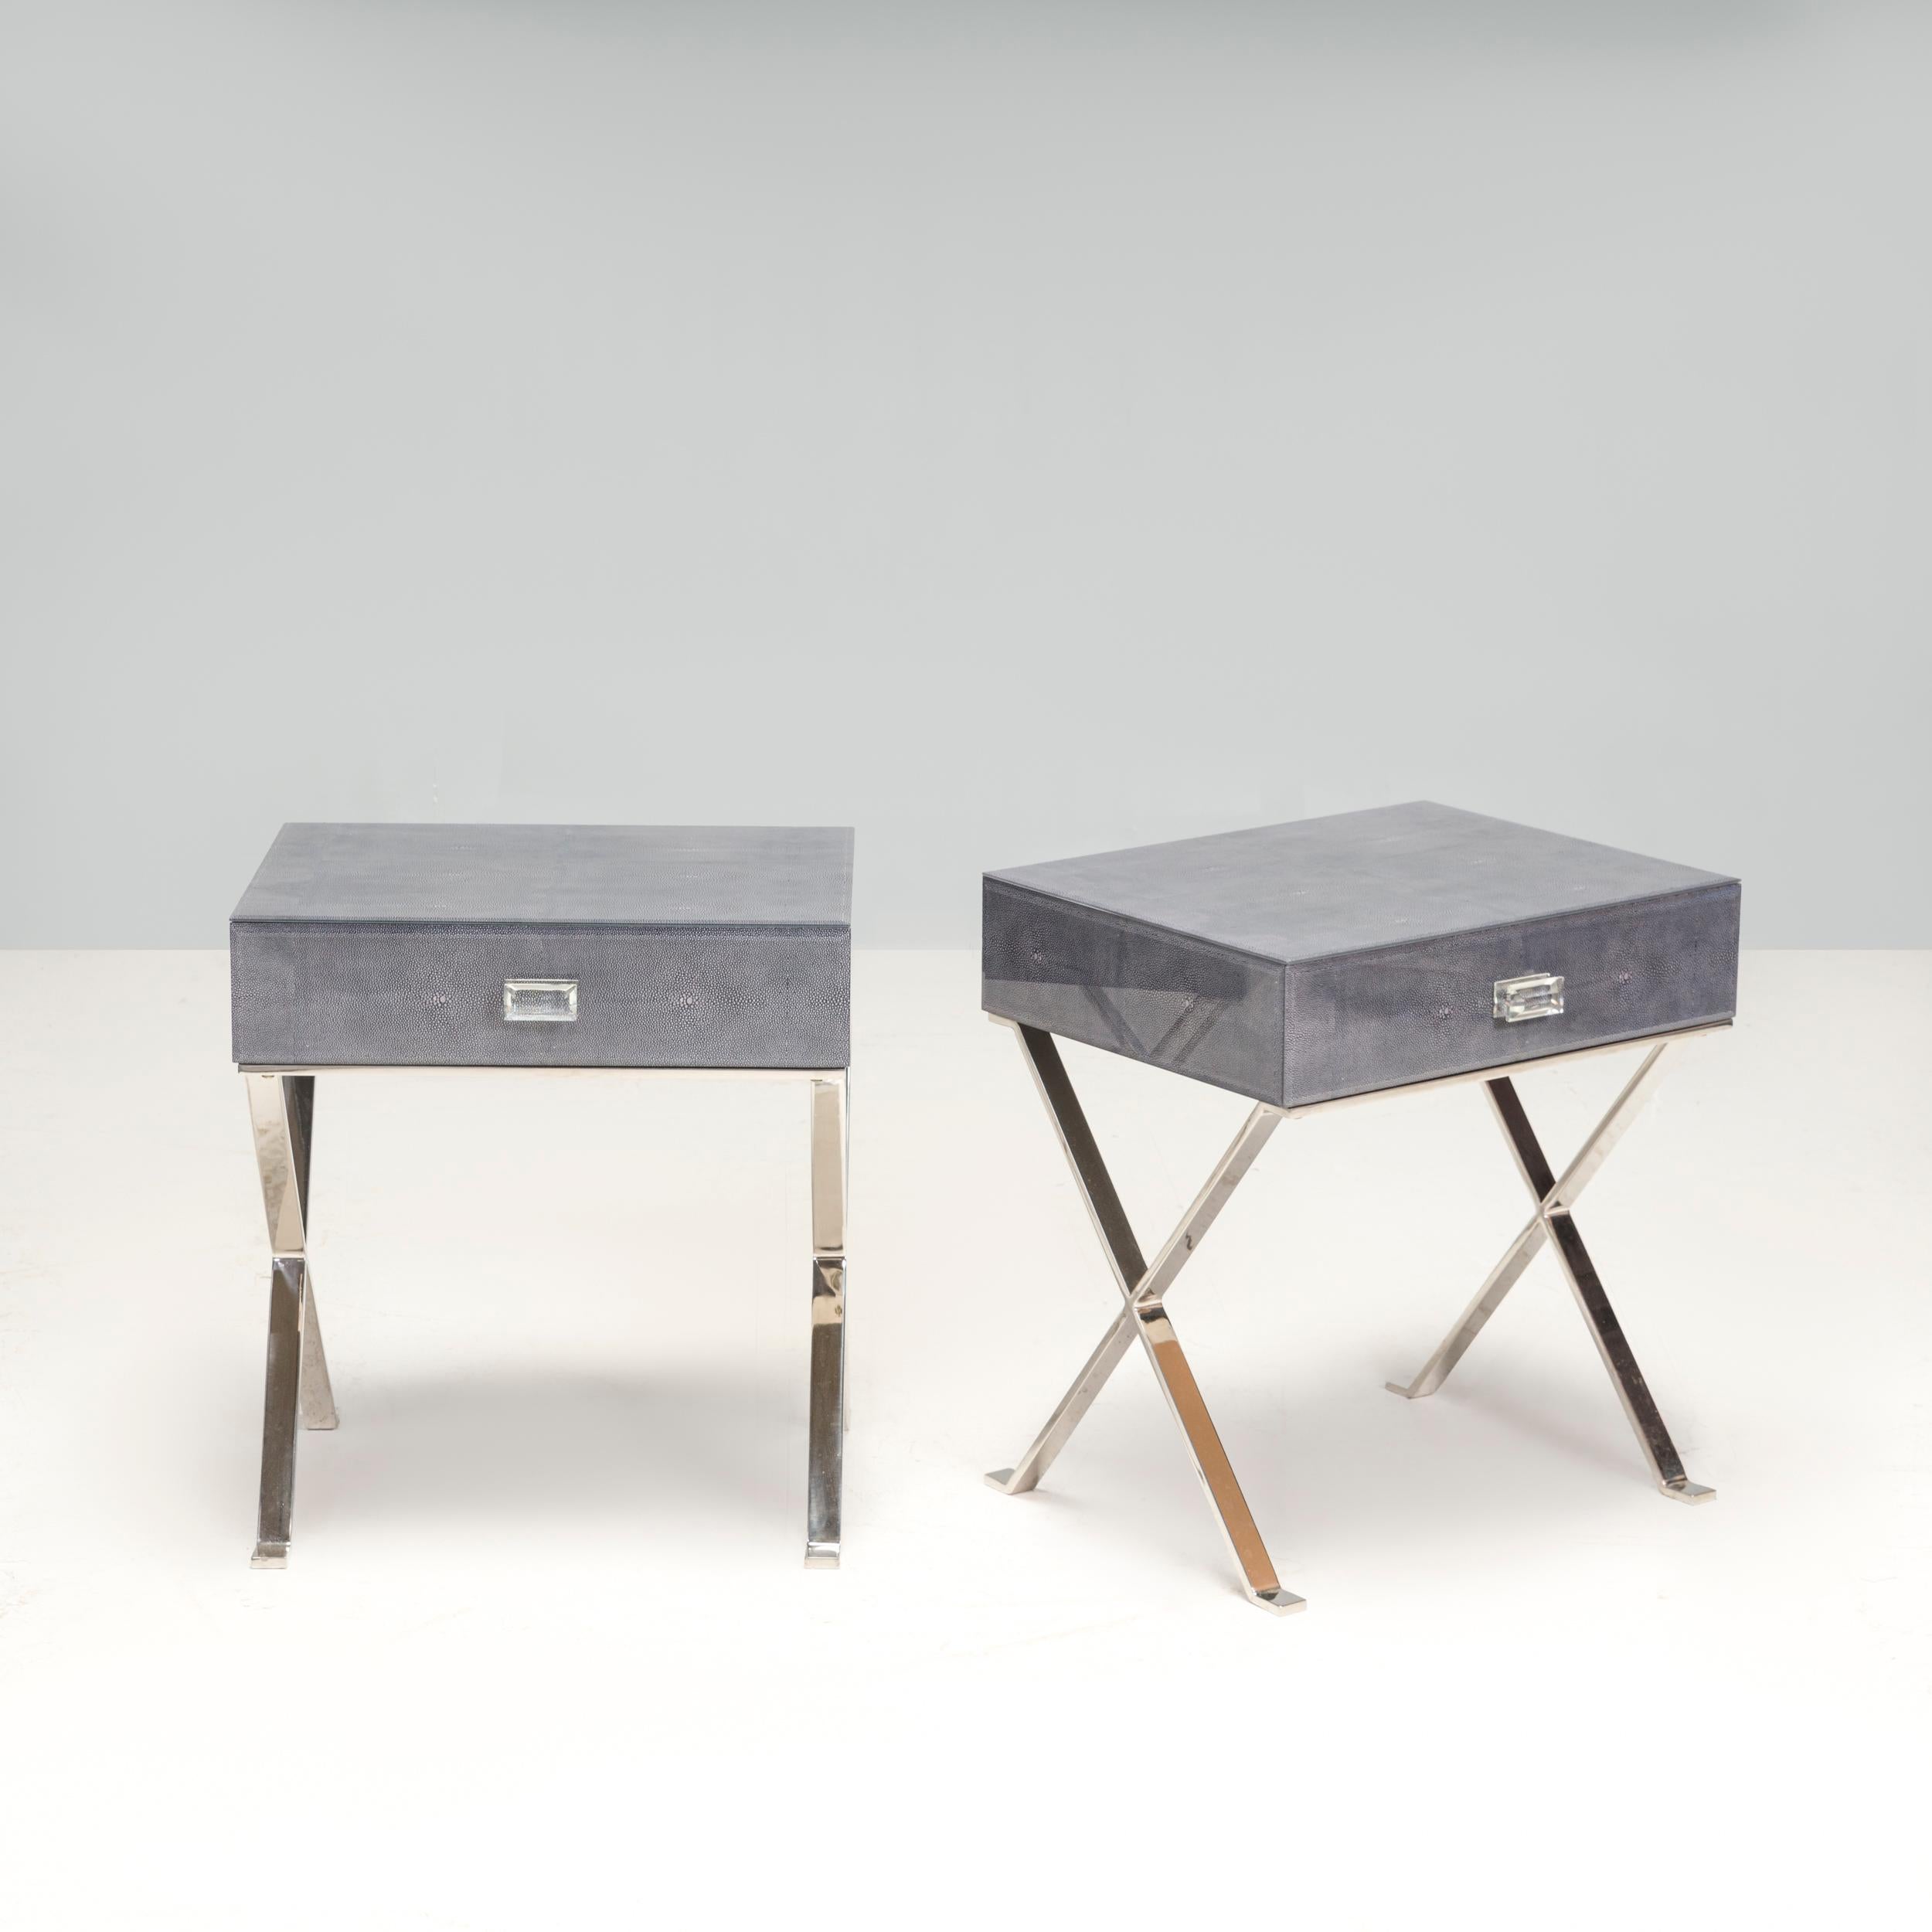 This modern bedside table will brighten up any bedroom. Featuring a trendy grey, faux cement finish, its boxy design contributes to its edgy style, as does the sleek chrome metal base. 

The unique structure of crossed legs also elevate the piece's